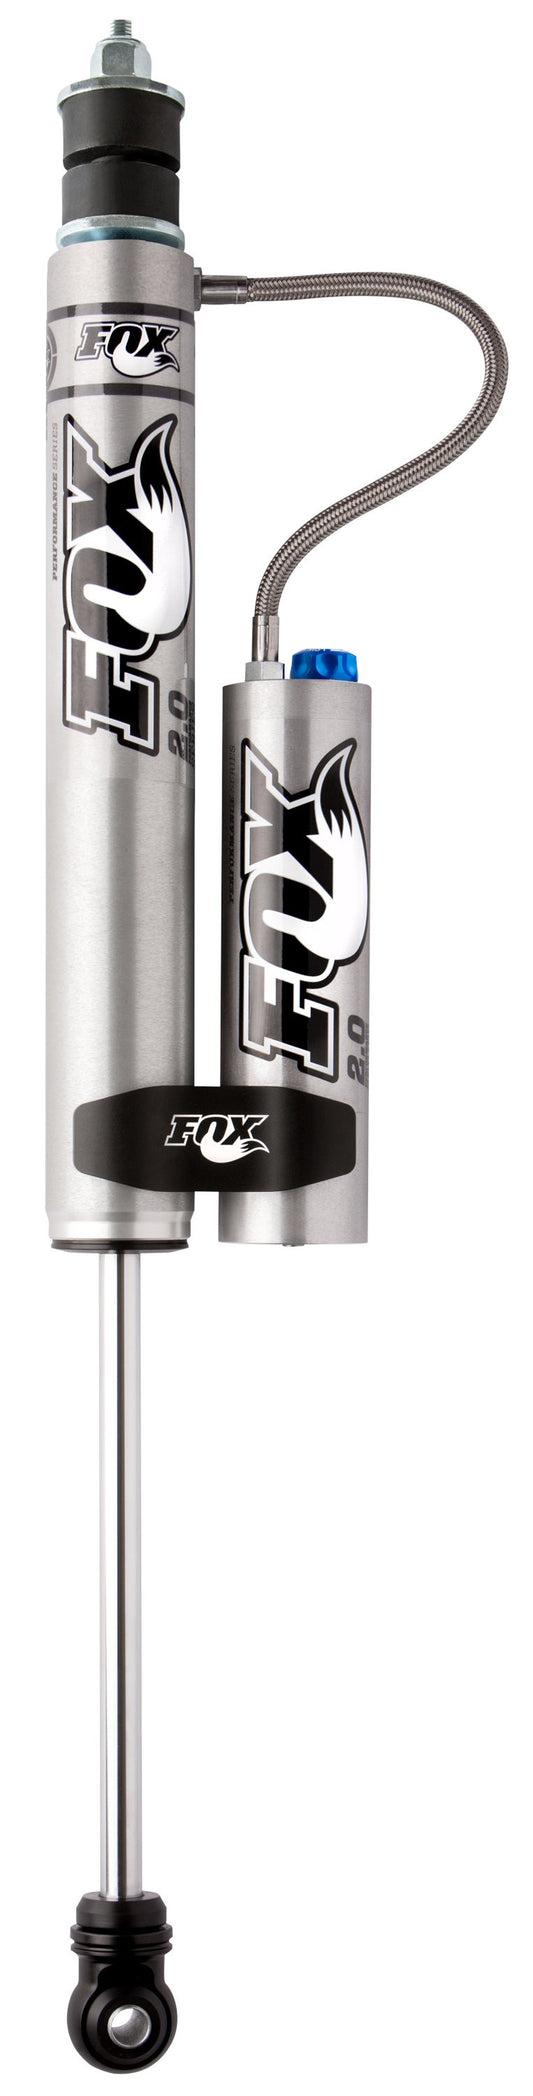 PERFORMANCE SERIES 2.0 SMOOTH BODY RESERVOIR SHOCK - ADJUSTABLE Lift: 4.5-5.5 2005-2016 Ford F-550 Super Duty FOX-985-26-104 - 2.0 SHOCK - FOX Offroad Shocks - Texas Complete Truck Center